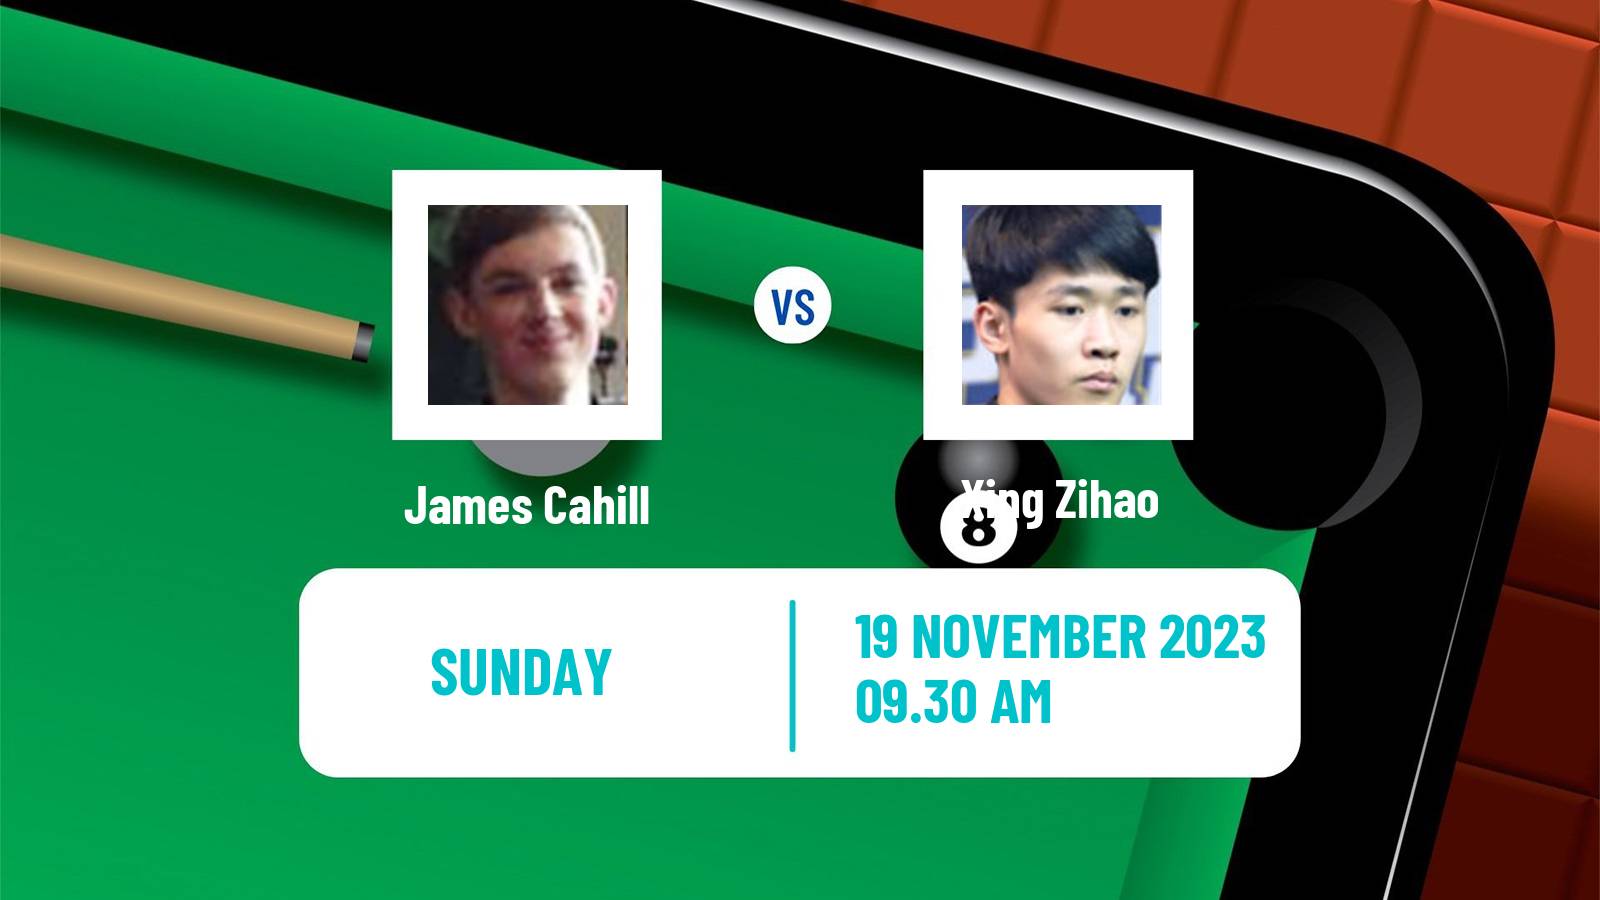 Snooker Uk Championship James Cahill - Xing Zihao